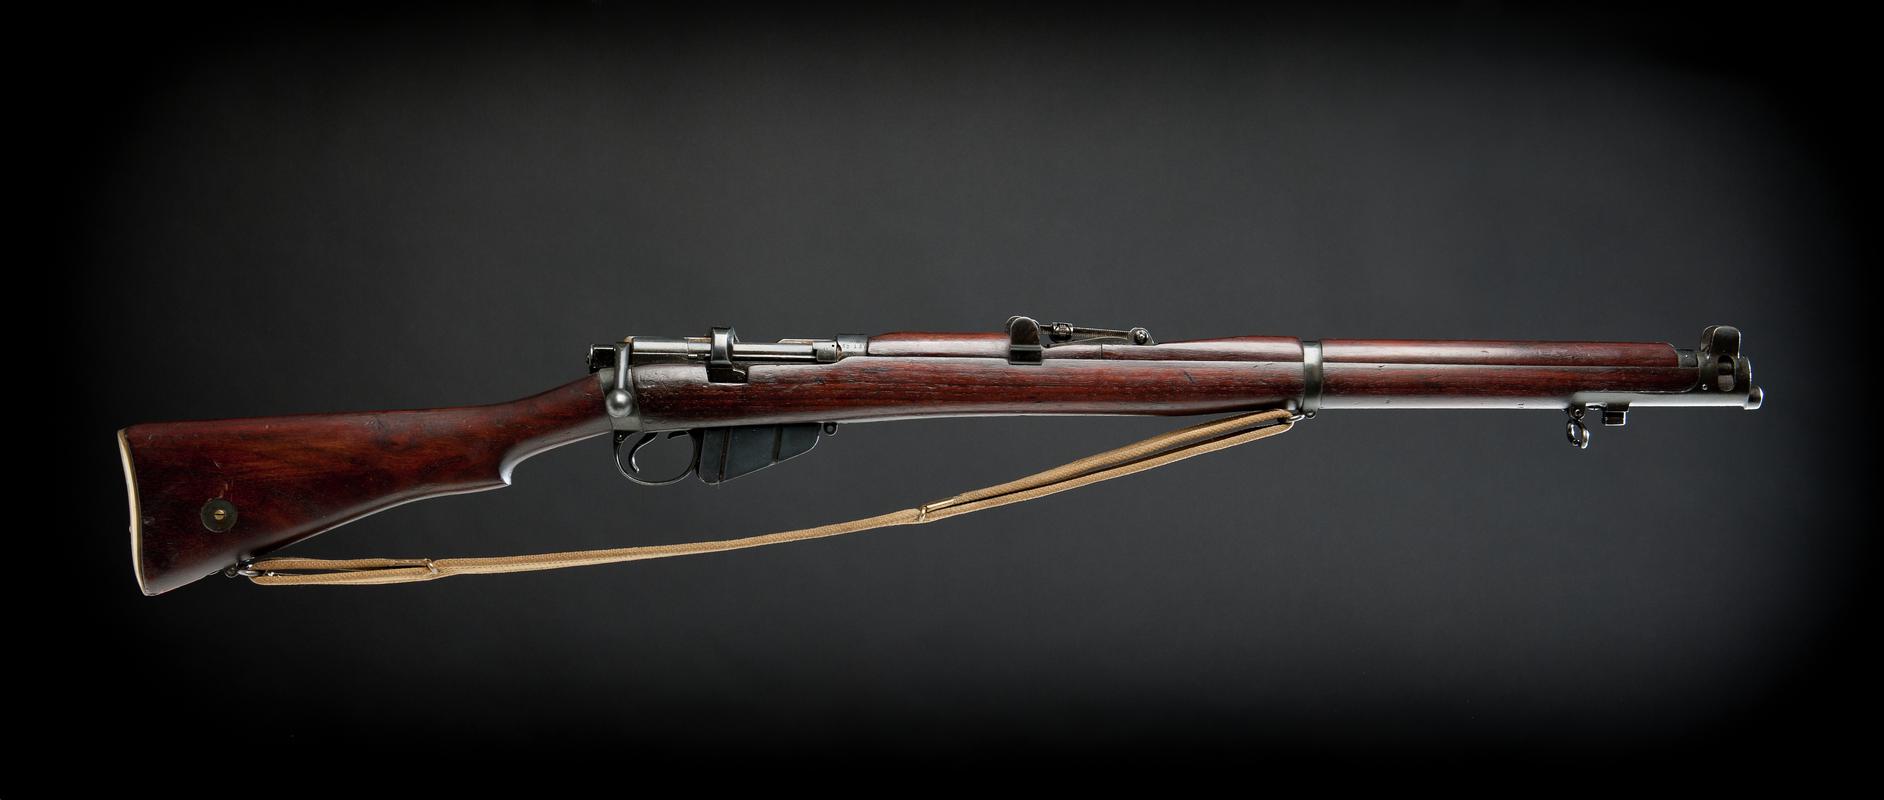 Lee Enfield bolt action rifle mark 3, with a breech-carrying strap.